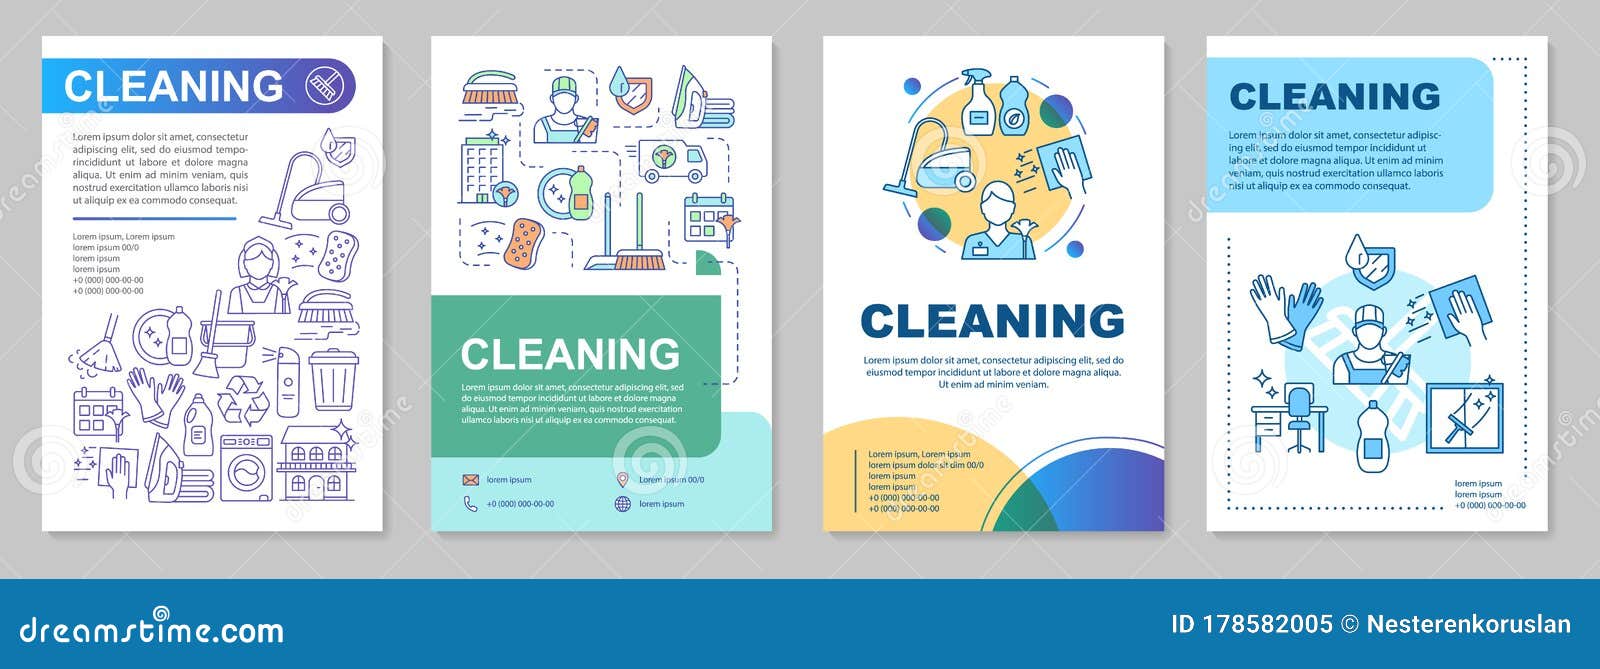 Cleaning Brochure Template Layout Stock Vector - Illustration of Regarding Commercial Cleaning Brochure Templates